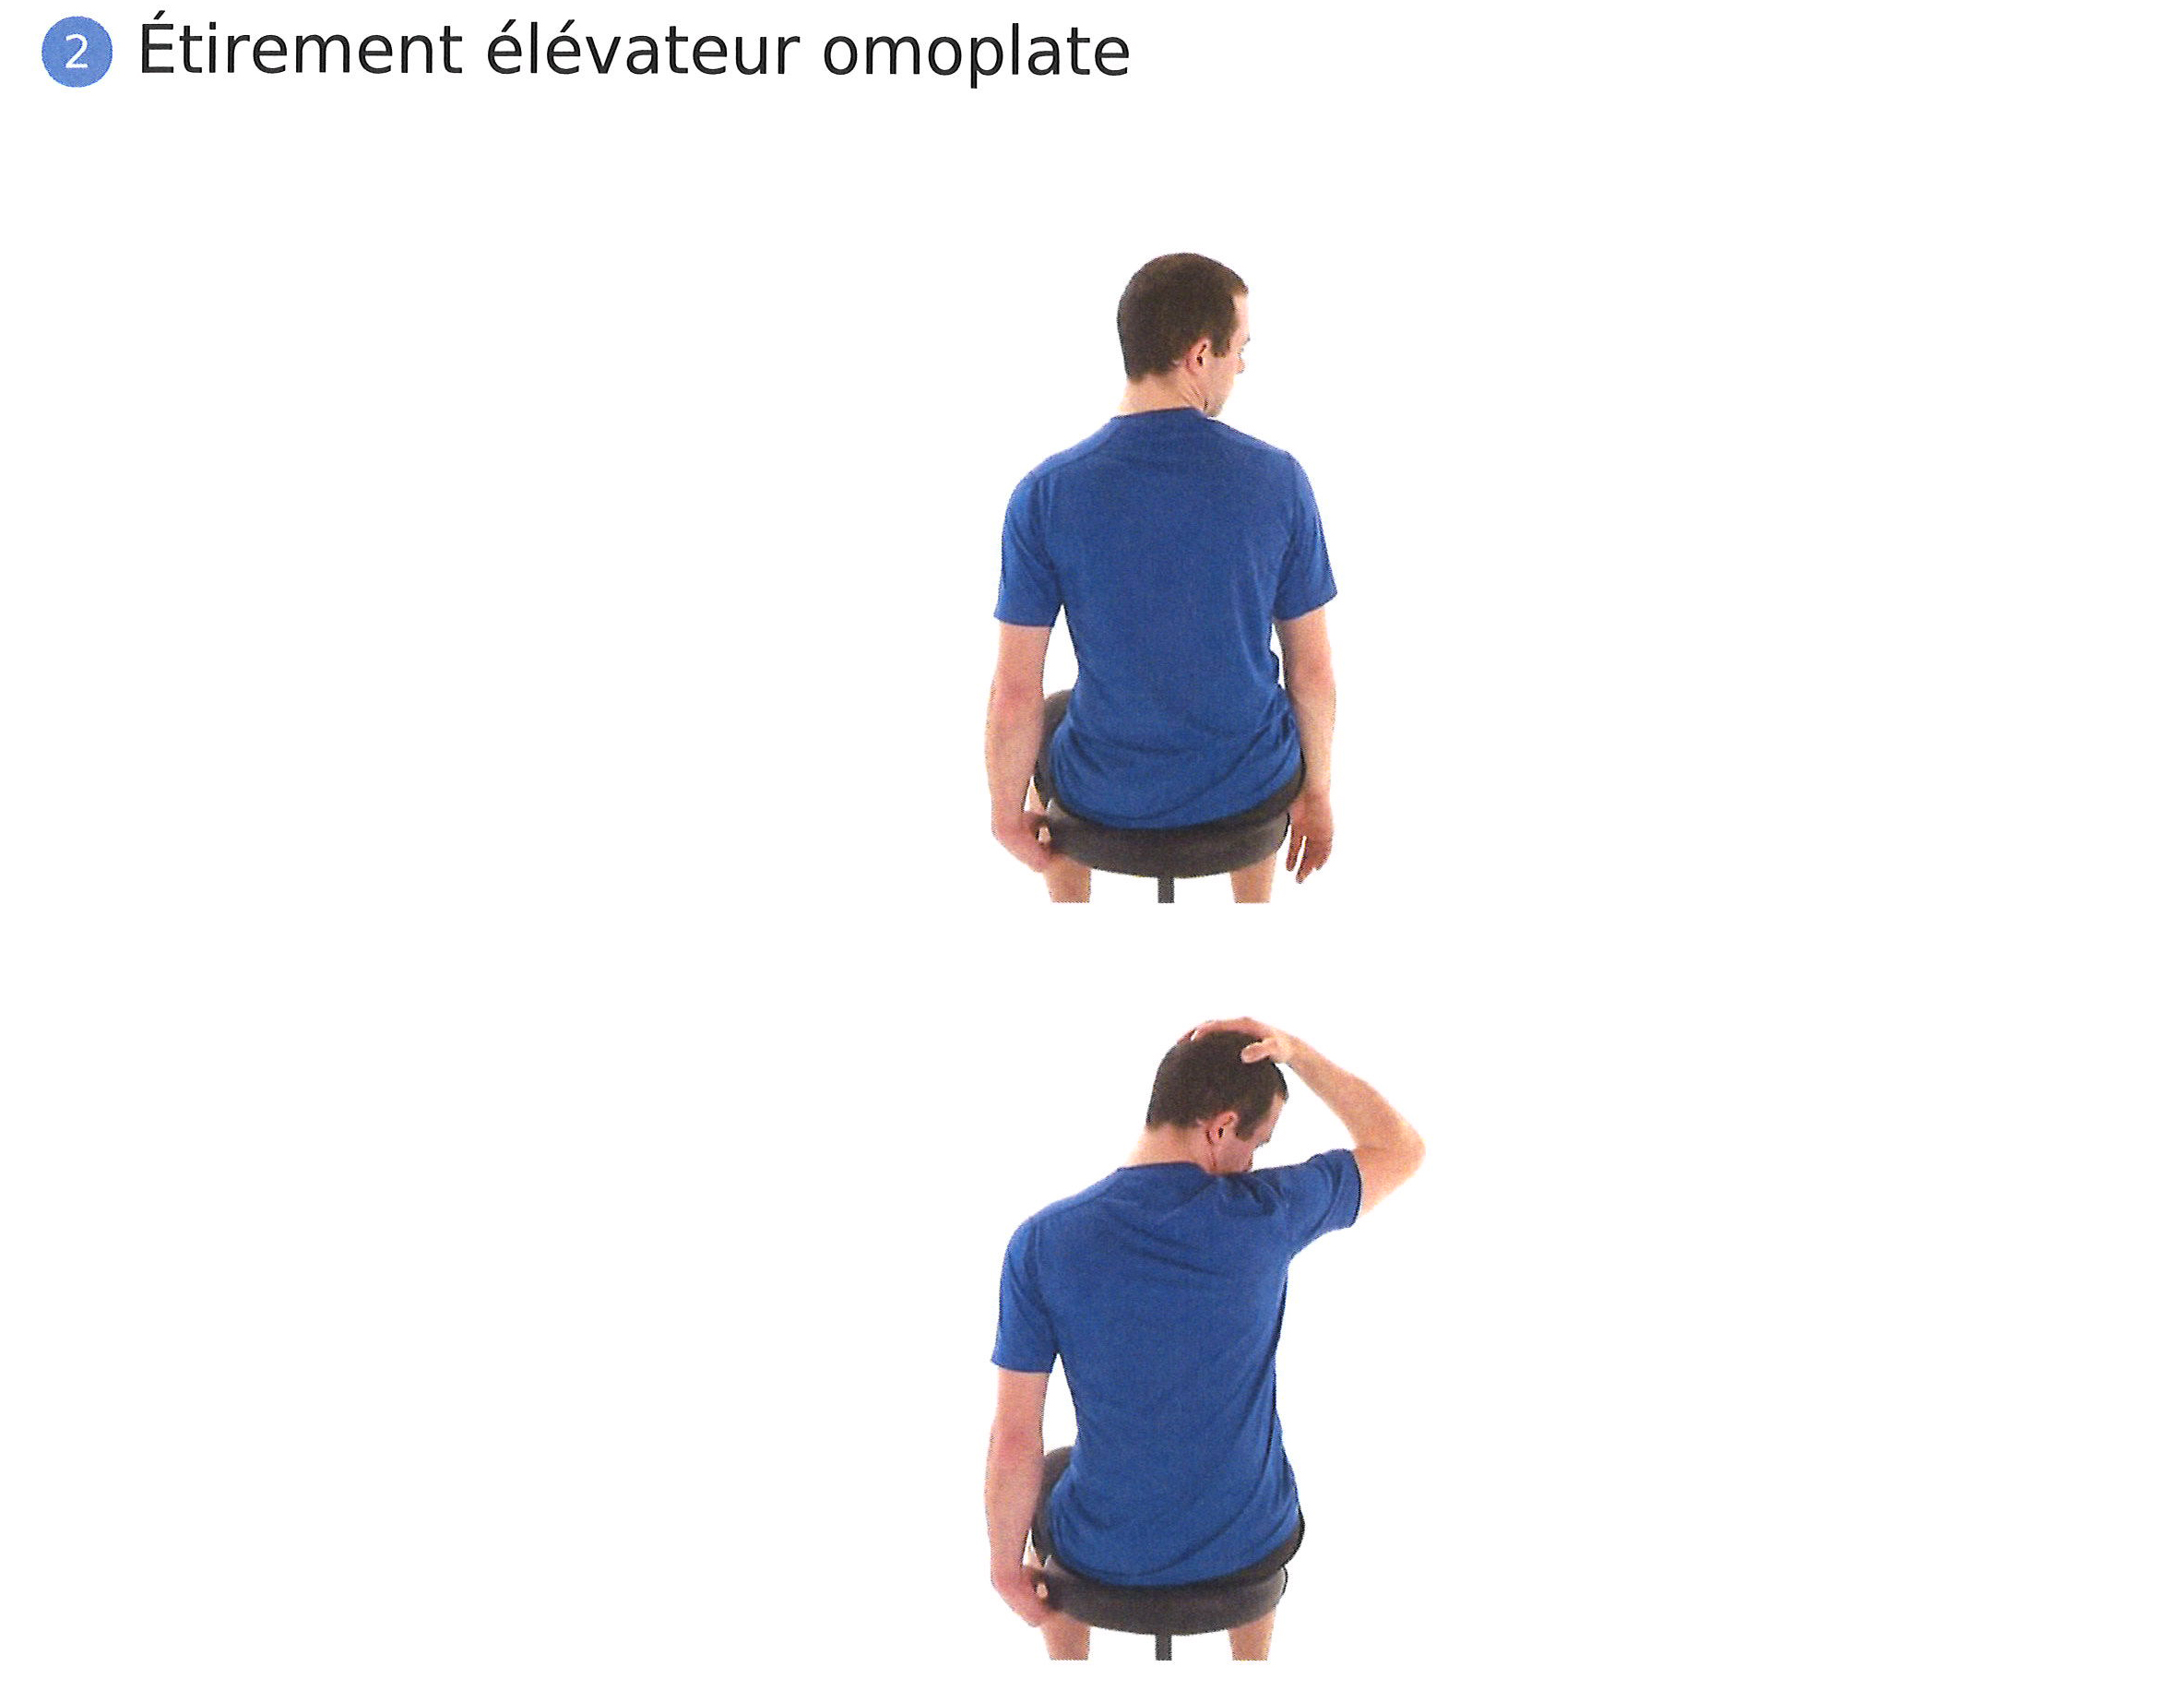 physio exercice hernie discale cervicale etirement elevateur homoplate